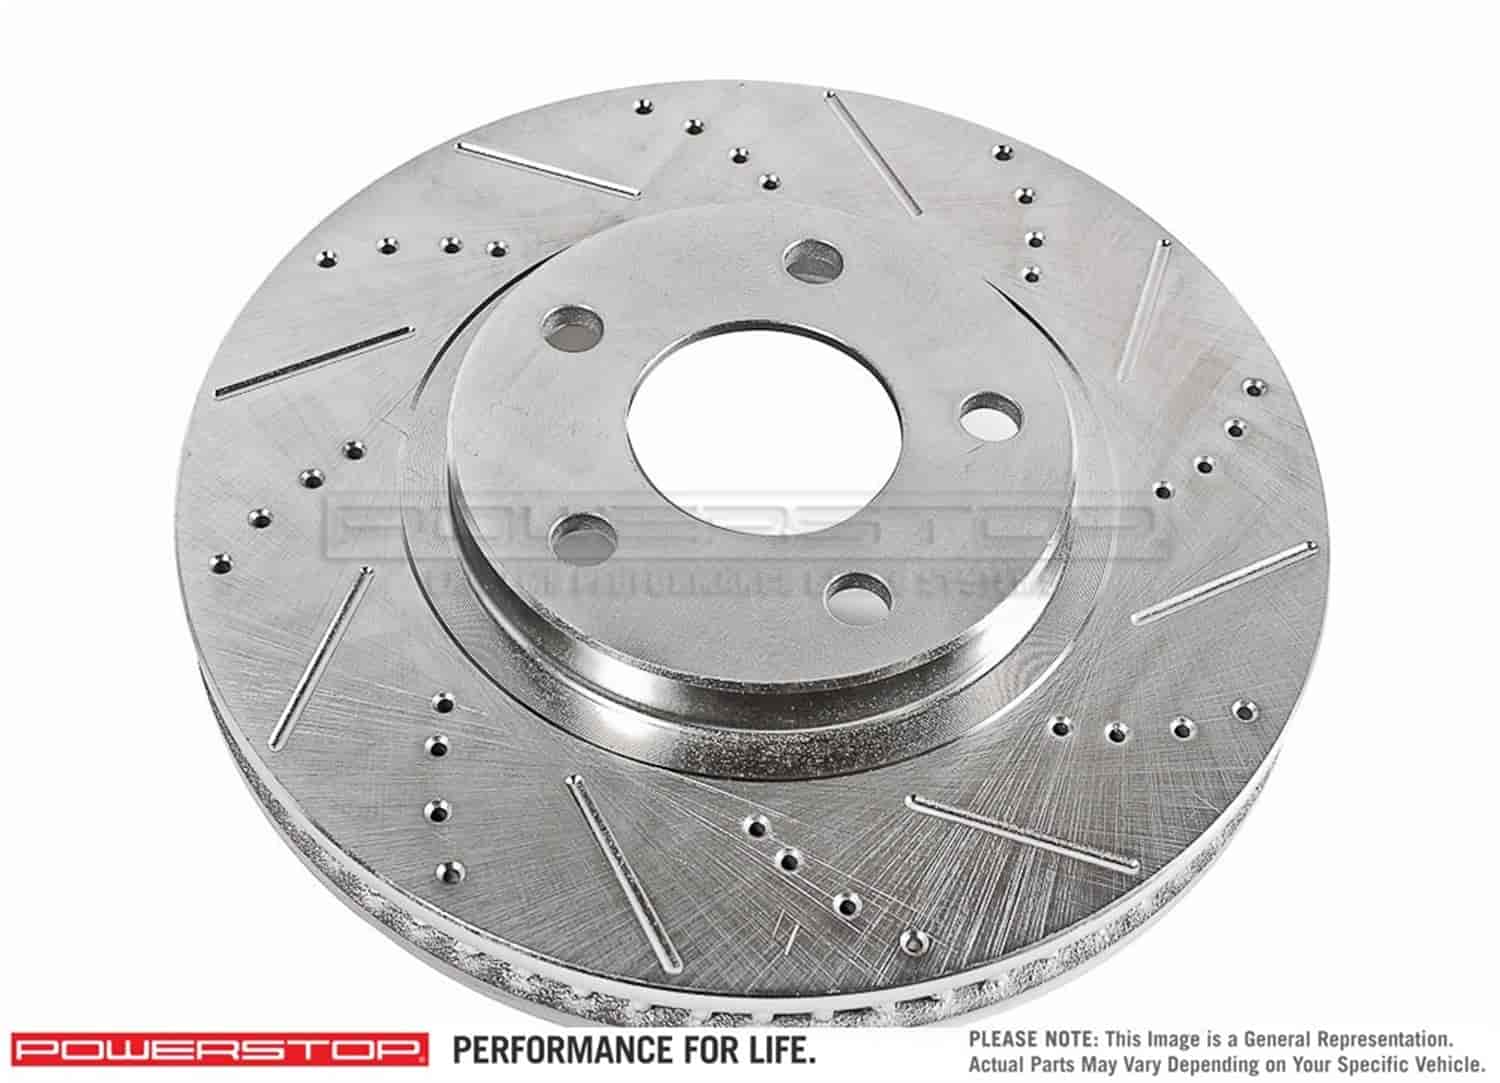 Extreme Performance Drilled And Slotted Front Brake Rotor Fits Select 2003-2005 Ford Models [Right/Passenger Side]